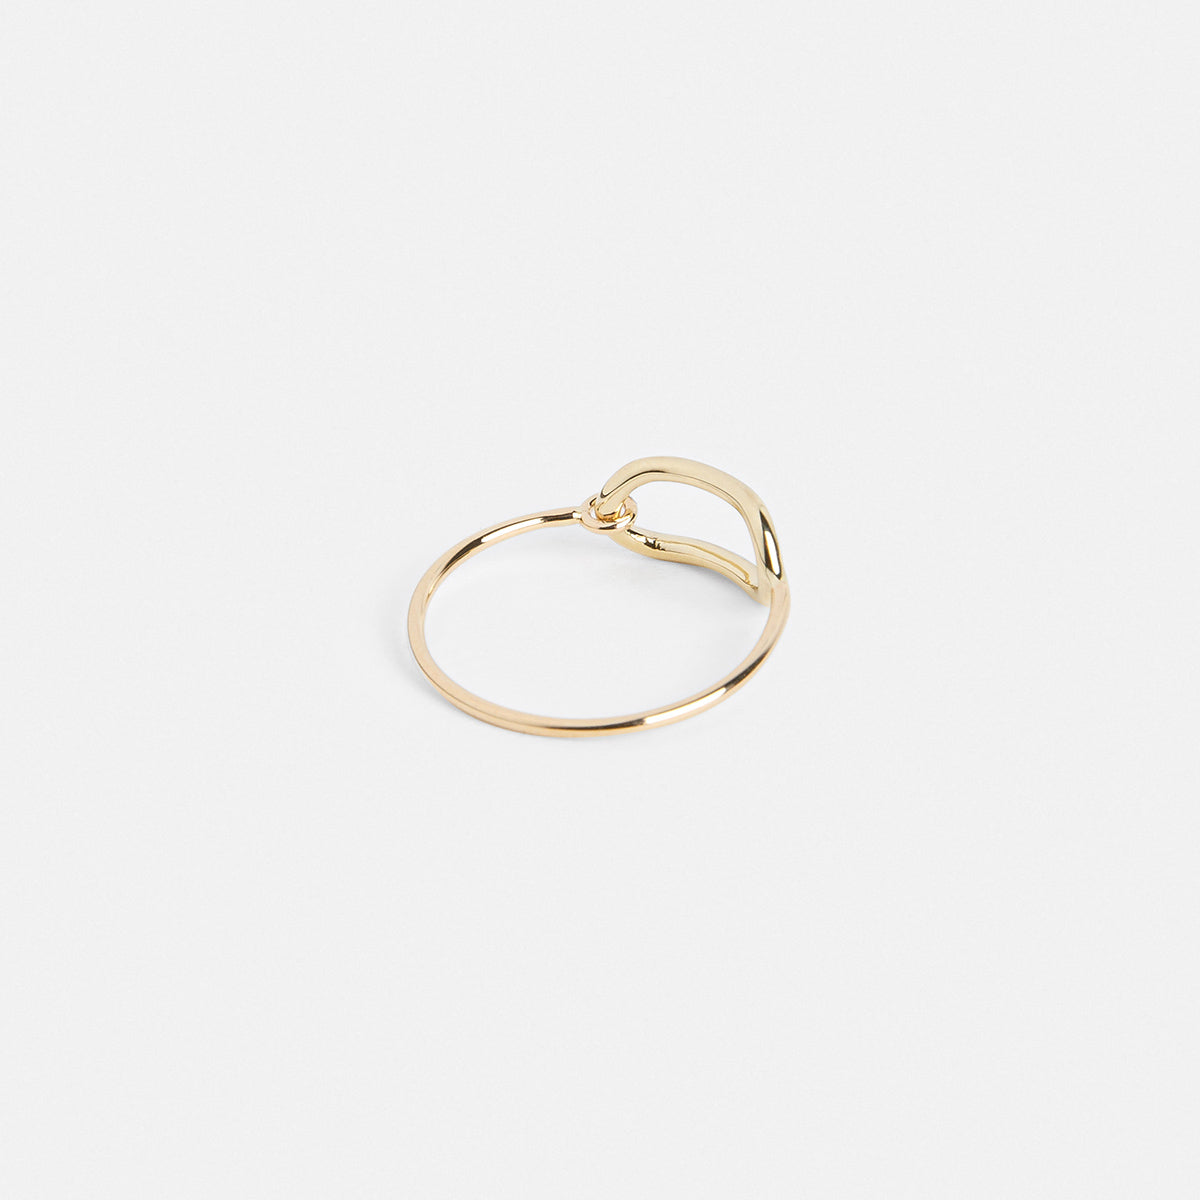 Vel Thin Ring in 14k Gold by SHW Fine Jewelry